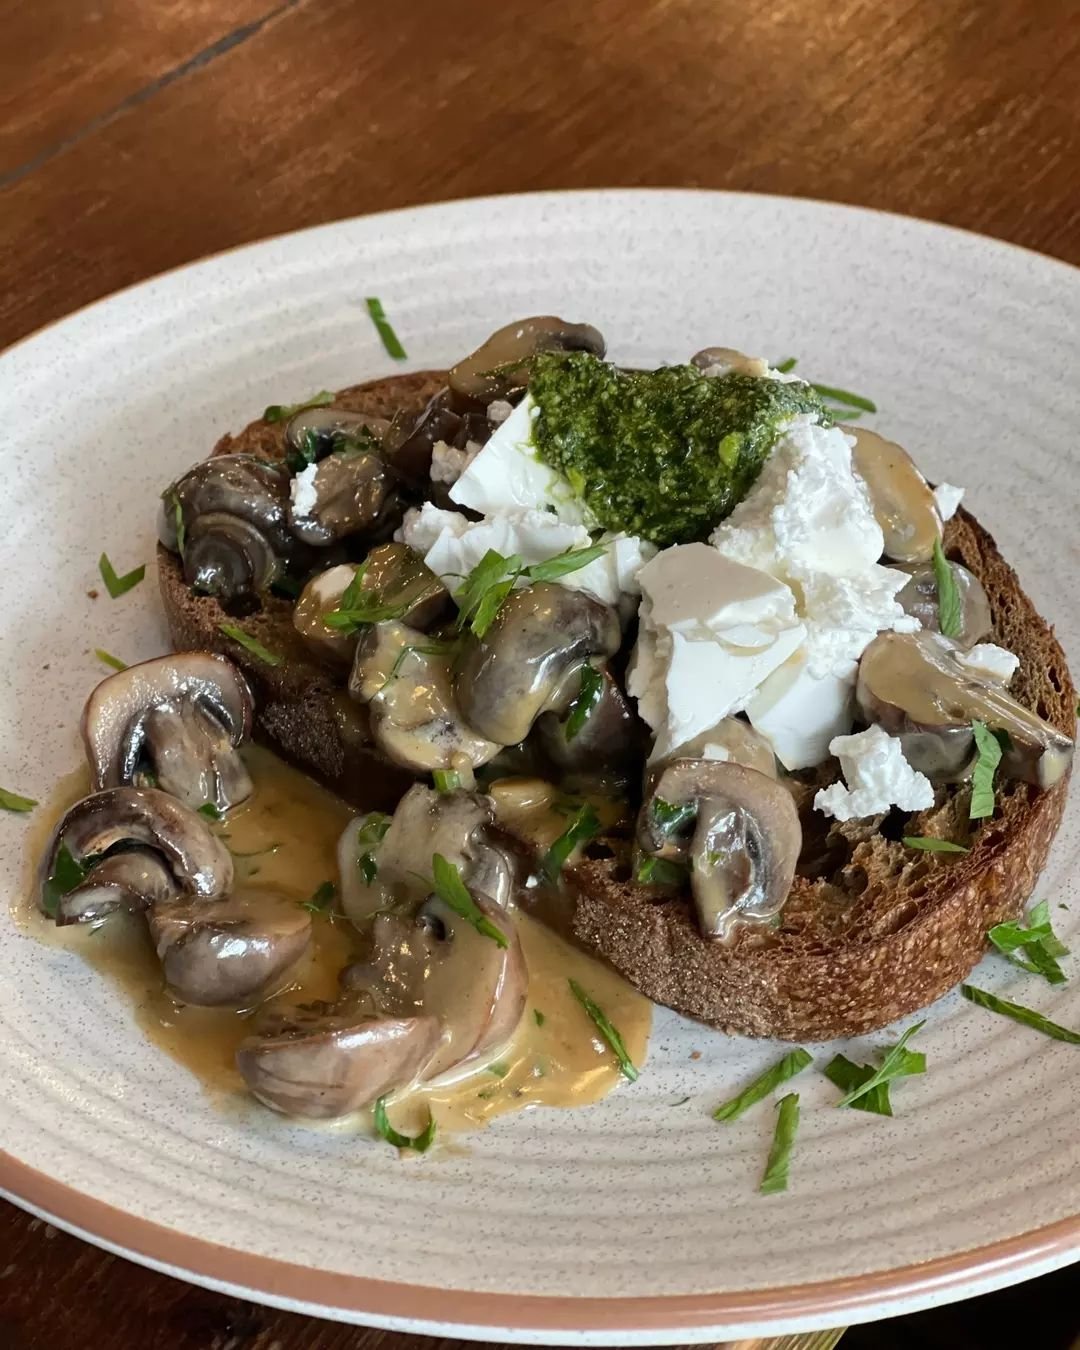 Happy Mother's Day! Today's special treat is our Mr Swiss sandwich: creamy garlic mushrooms, Danish feta, and house-made pesto on toasted rye.